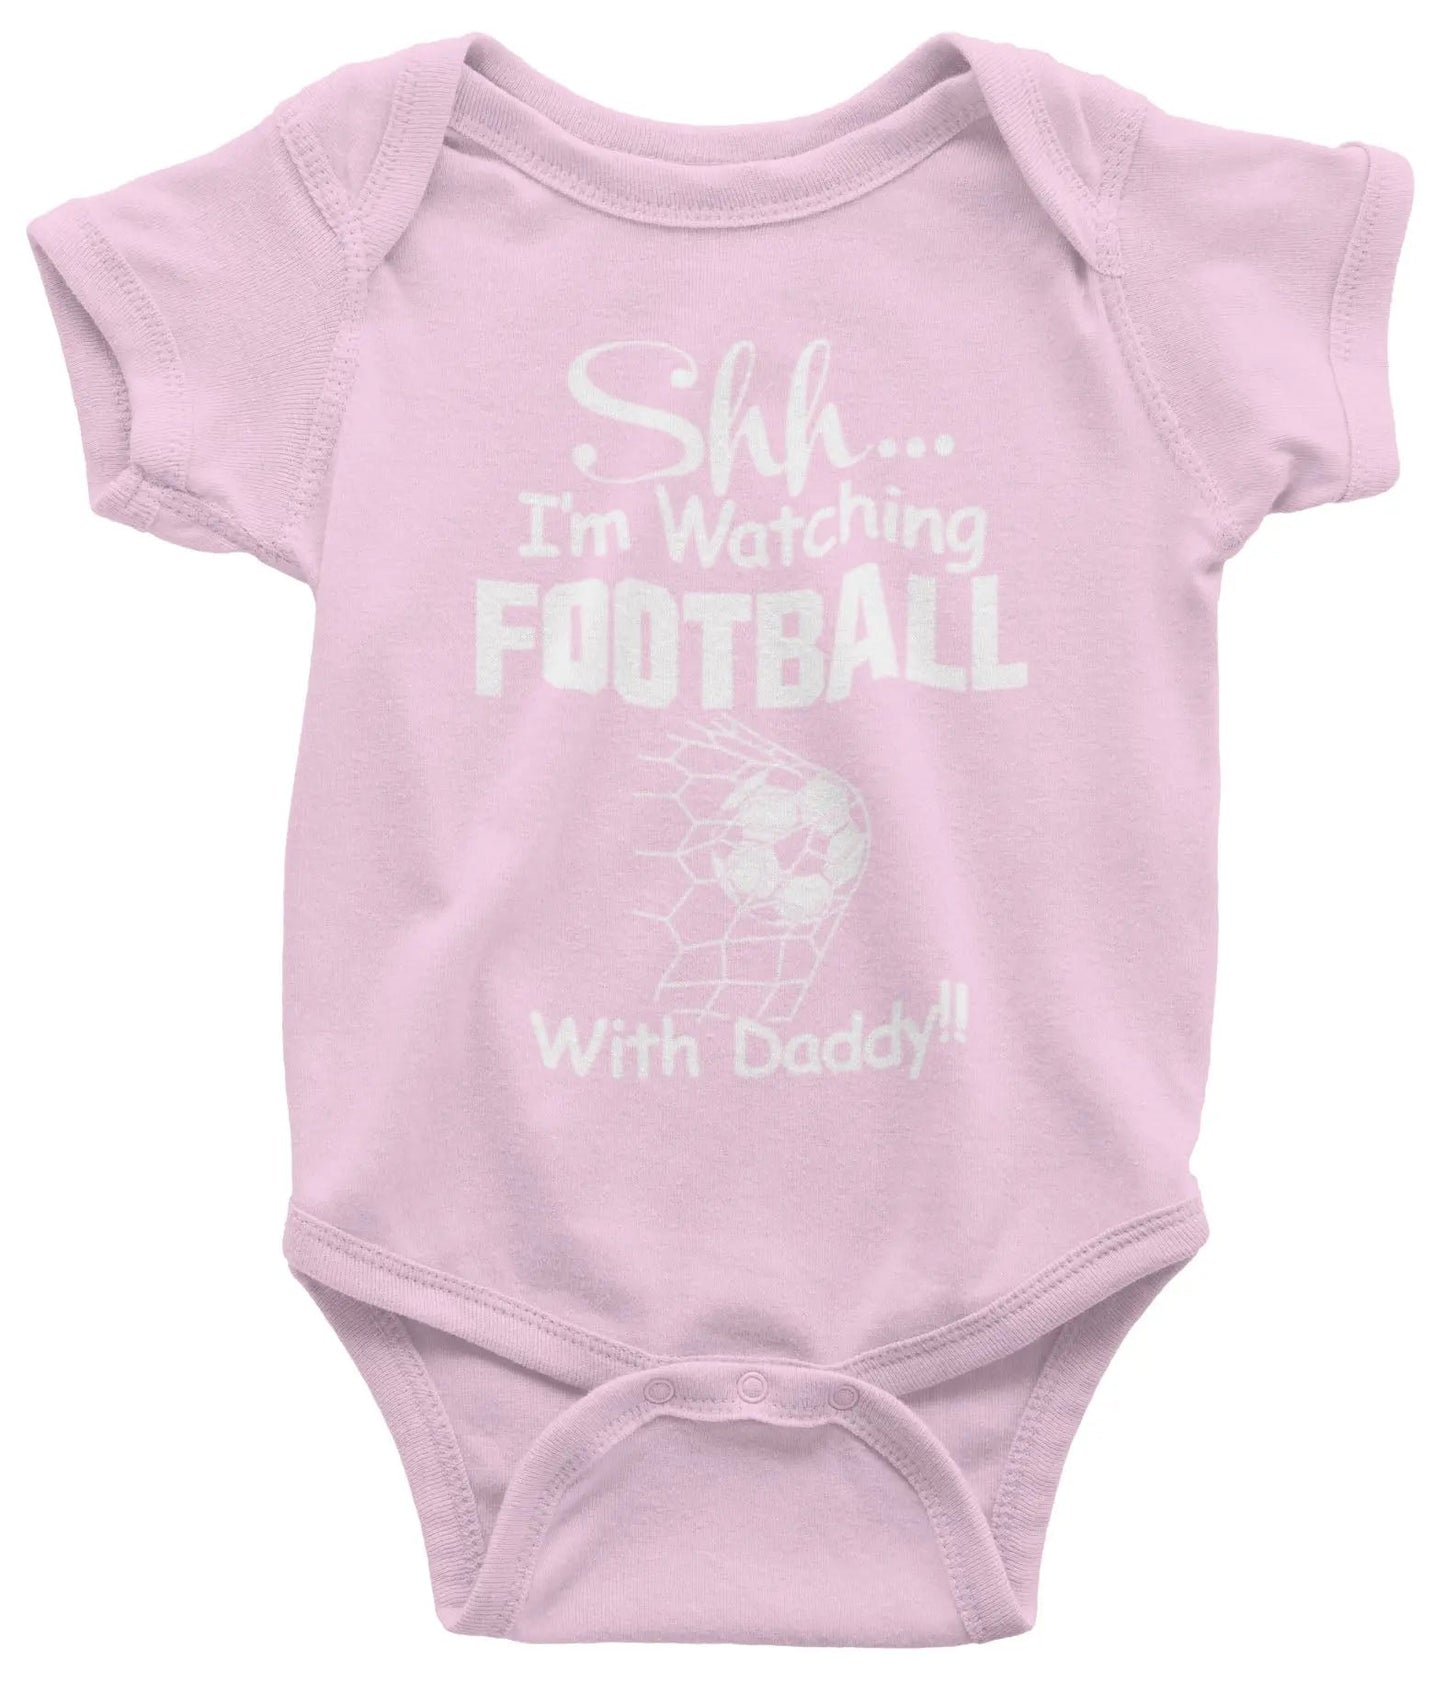 Printed Baby Bodysuit Shh I'm Watching Football With Daddy